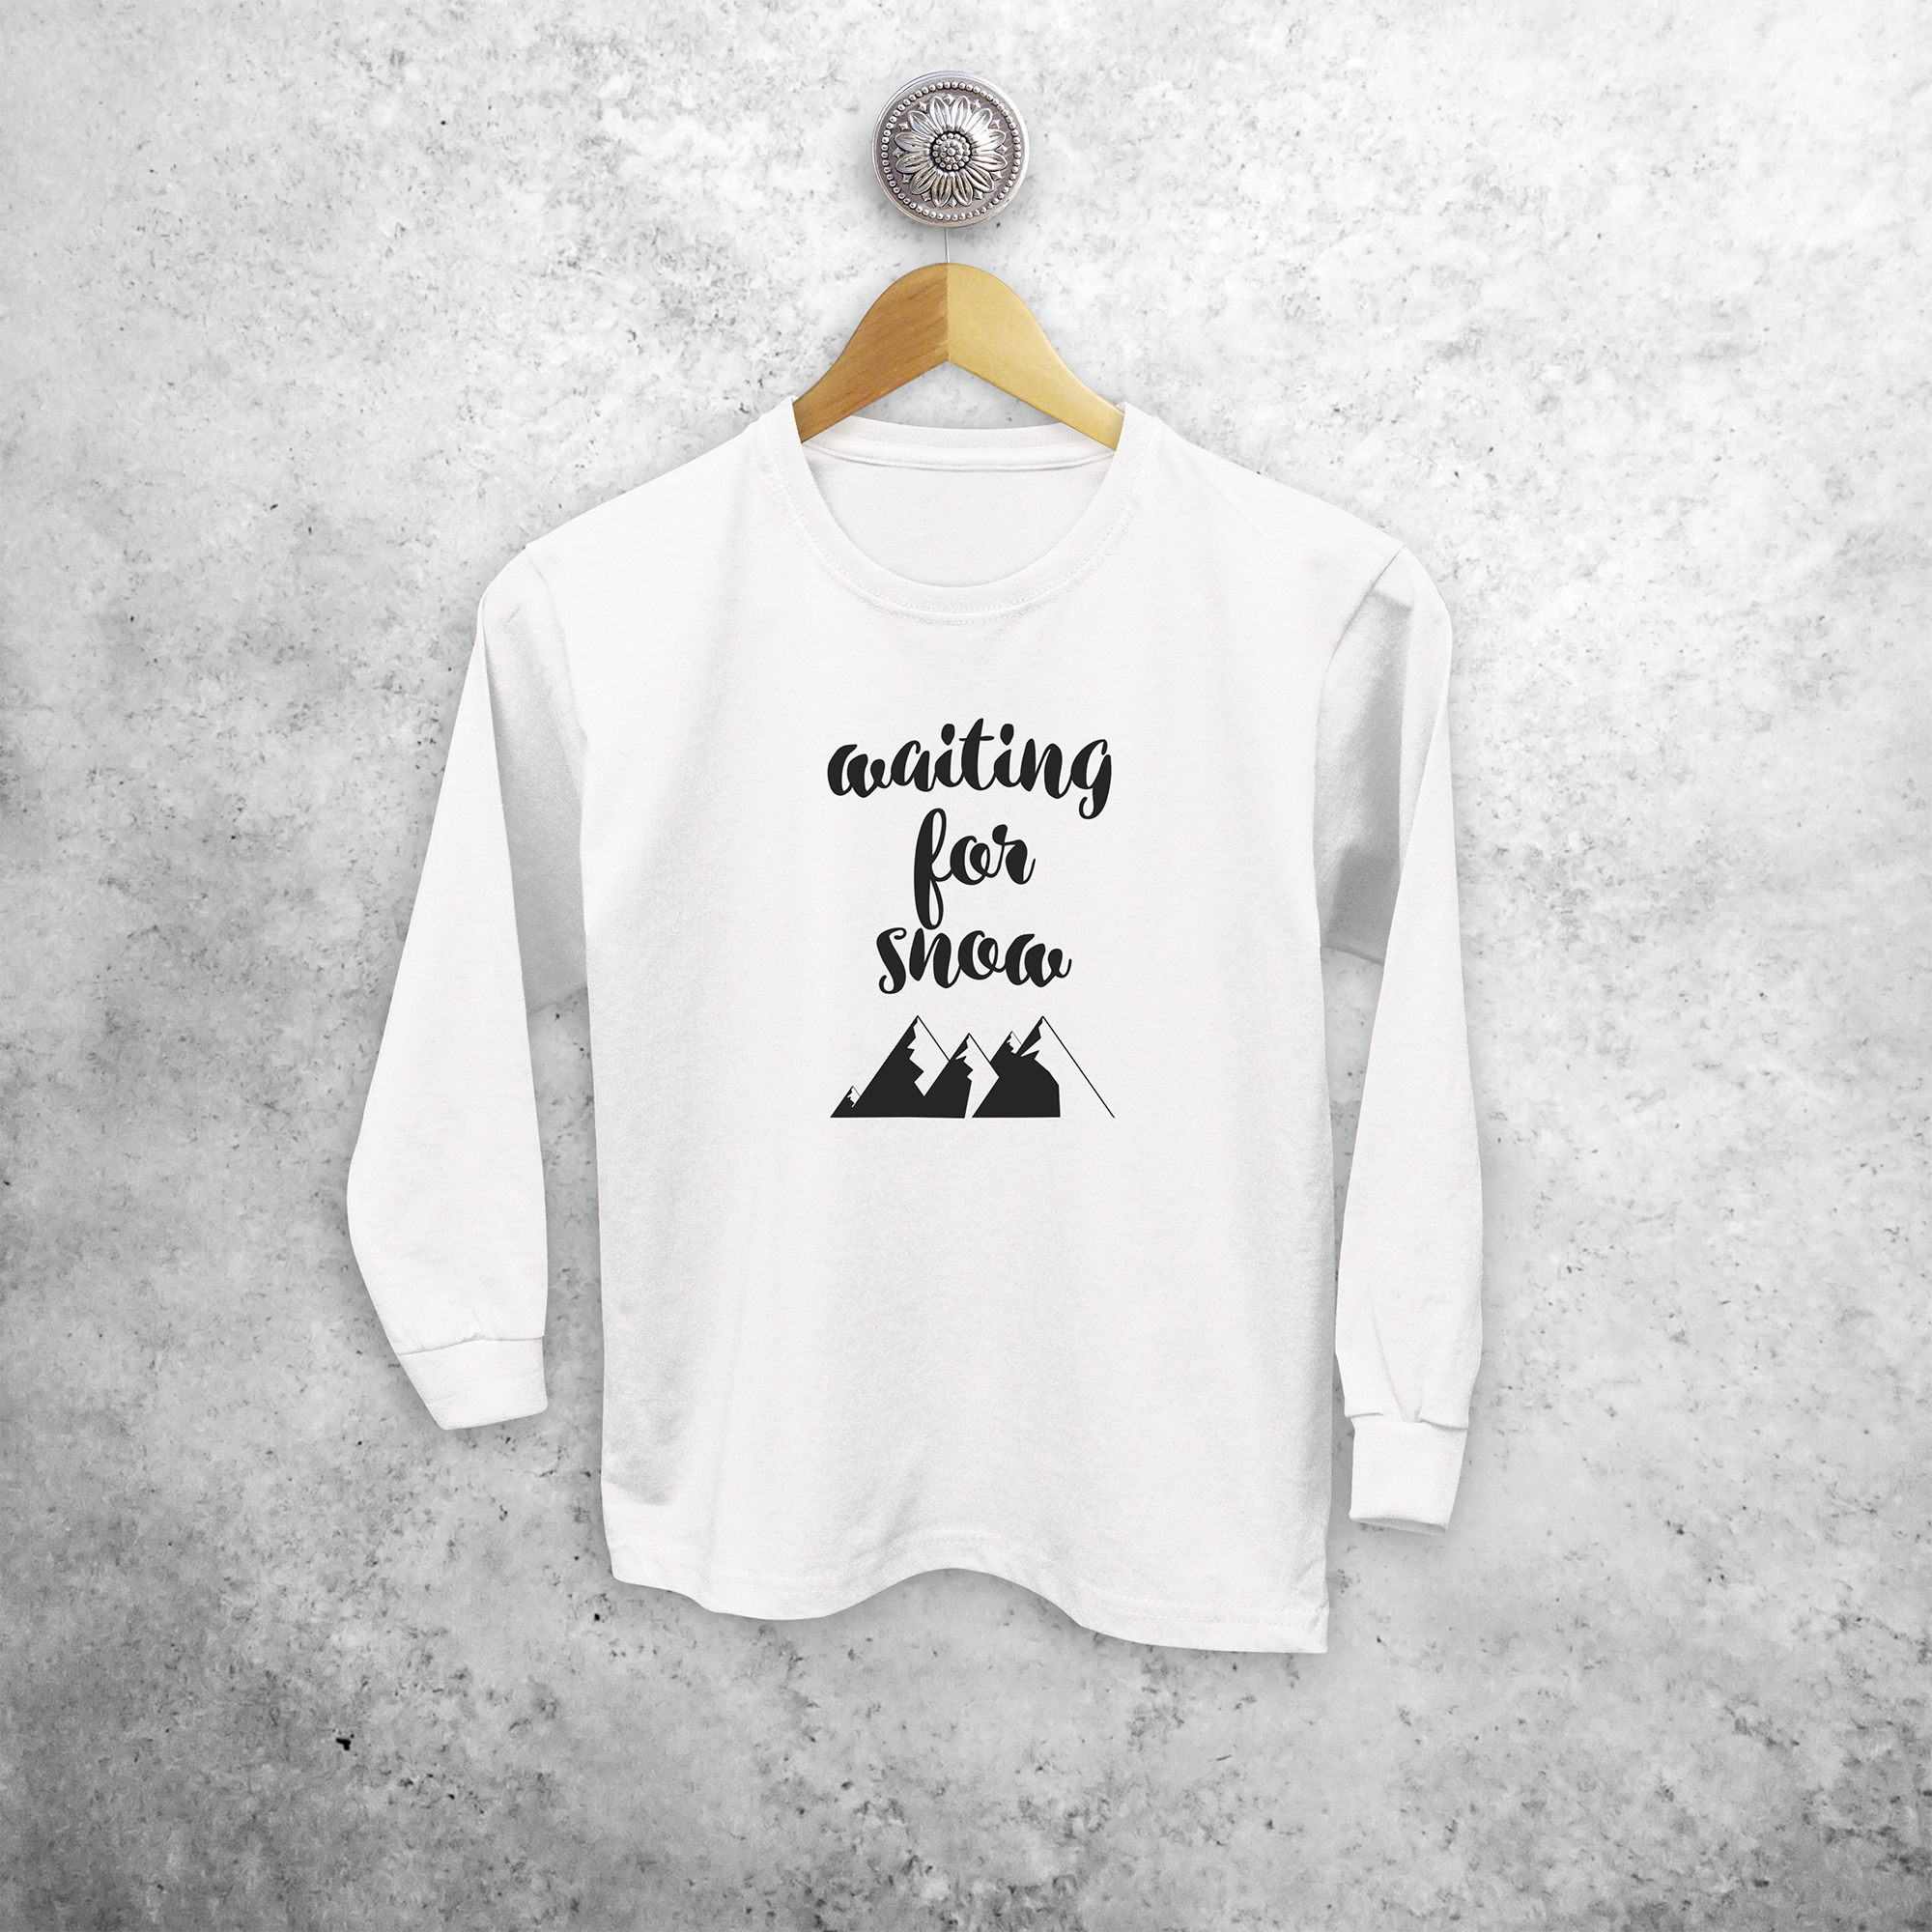 Kids shirt with long sleeves, with ‘Waiting for snow’ print by KMLeon.